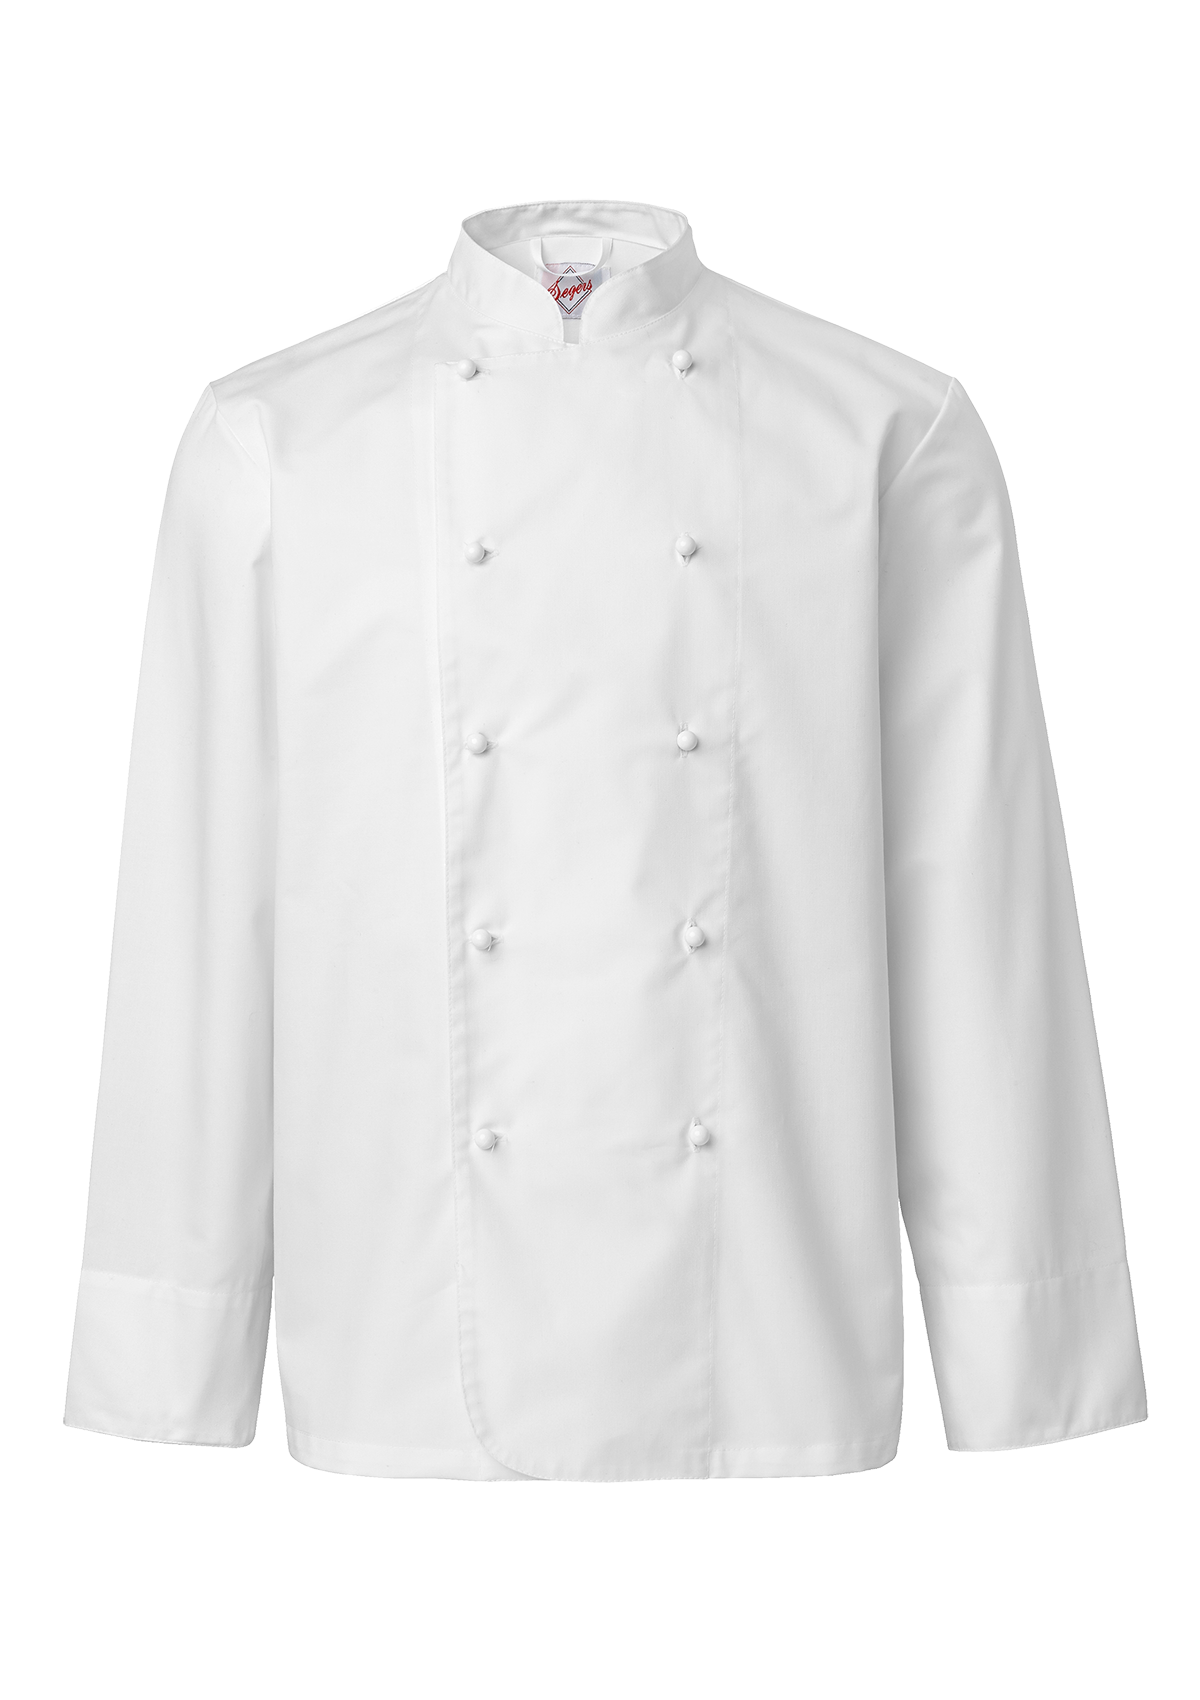 Men's Chef jacket in classic straight cut with long sleeves for men. Segers | Cookniche